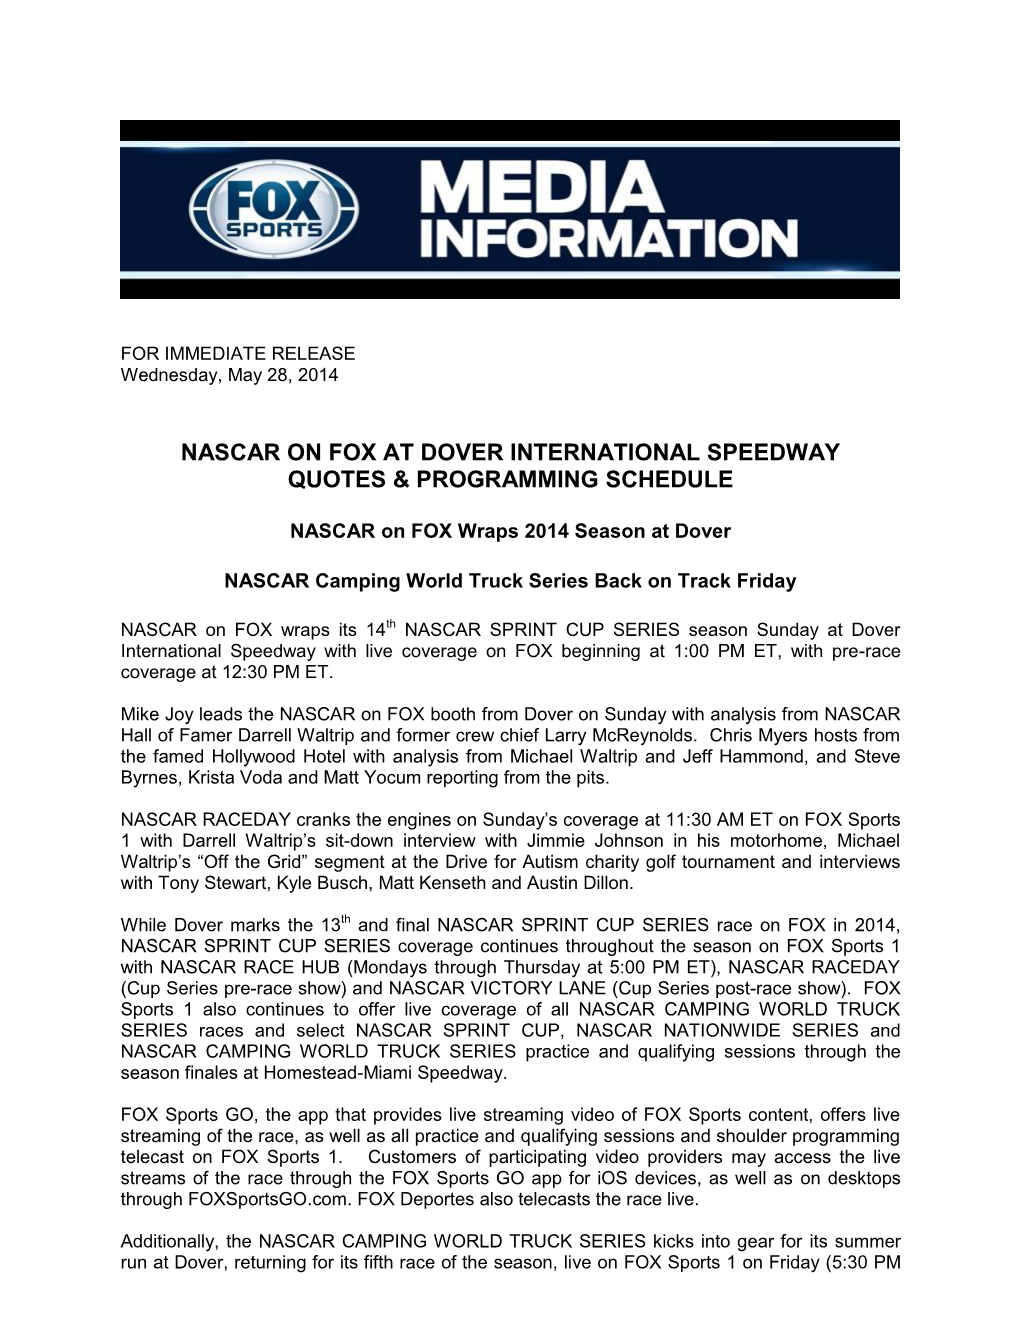 Nascar on Fox at Dover International Speedway Quotes & Programming Schedule